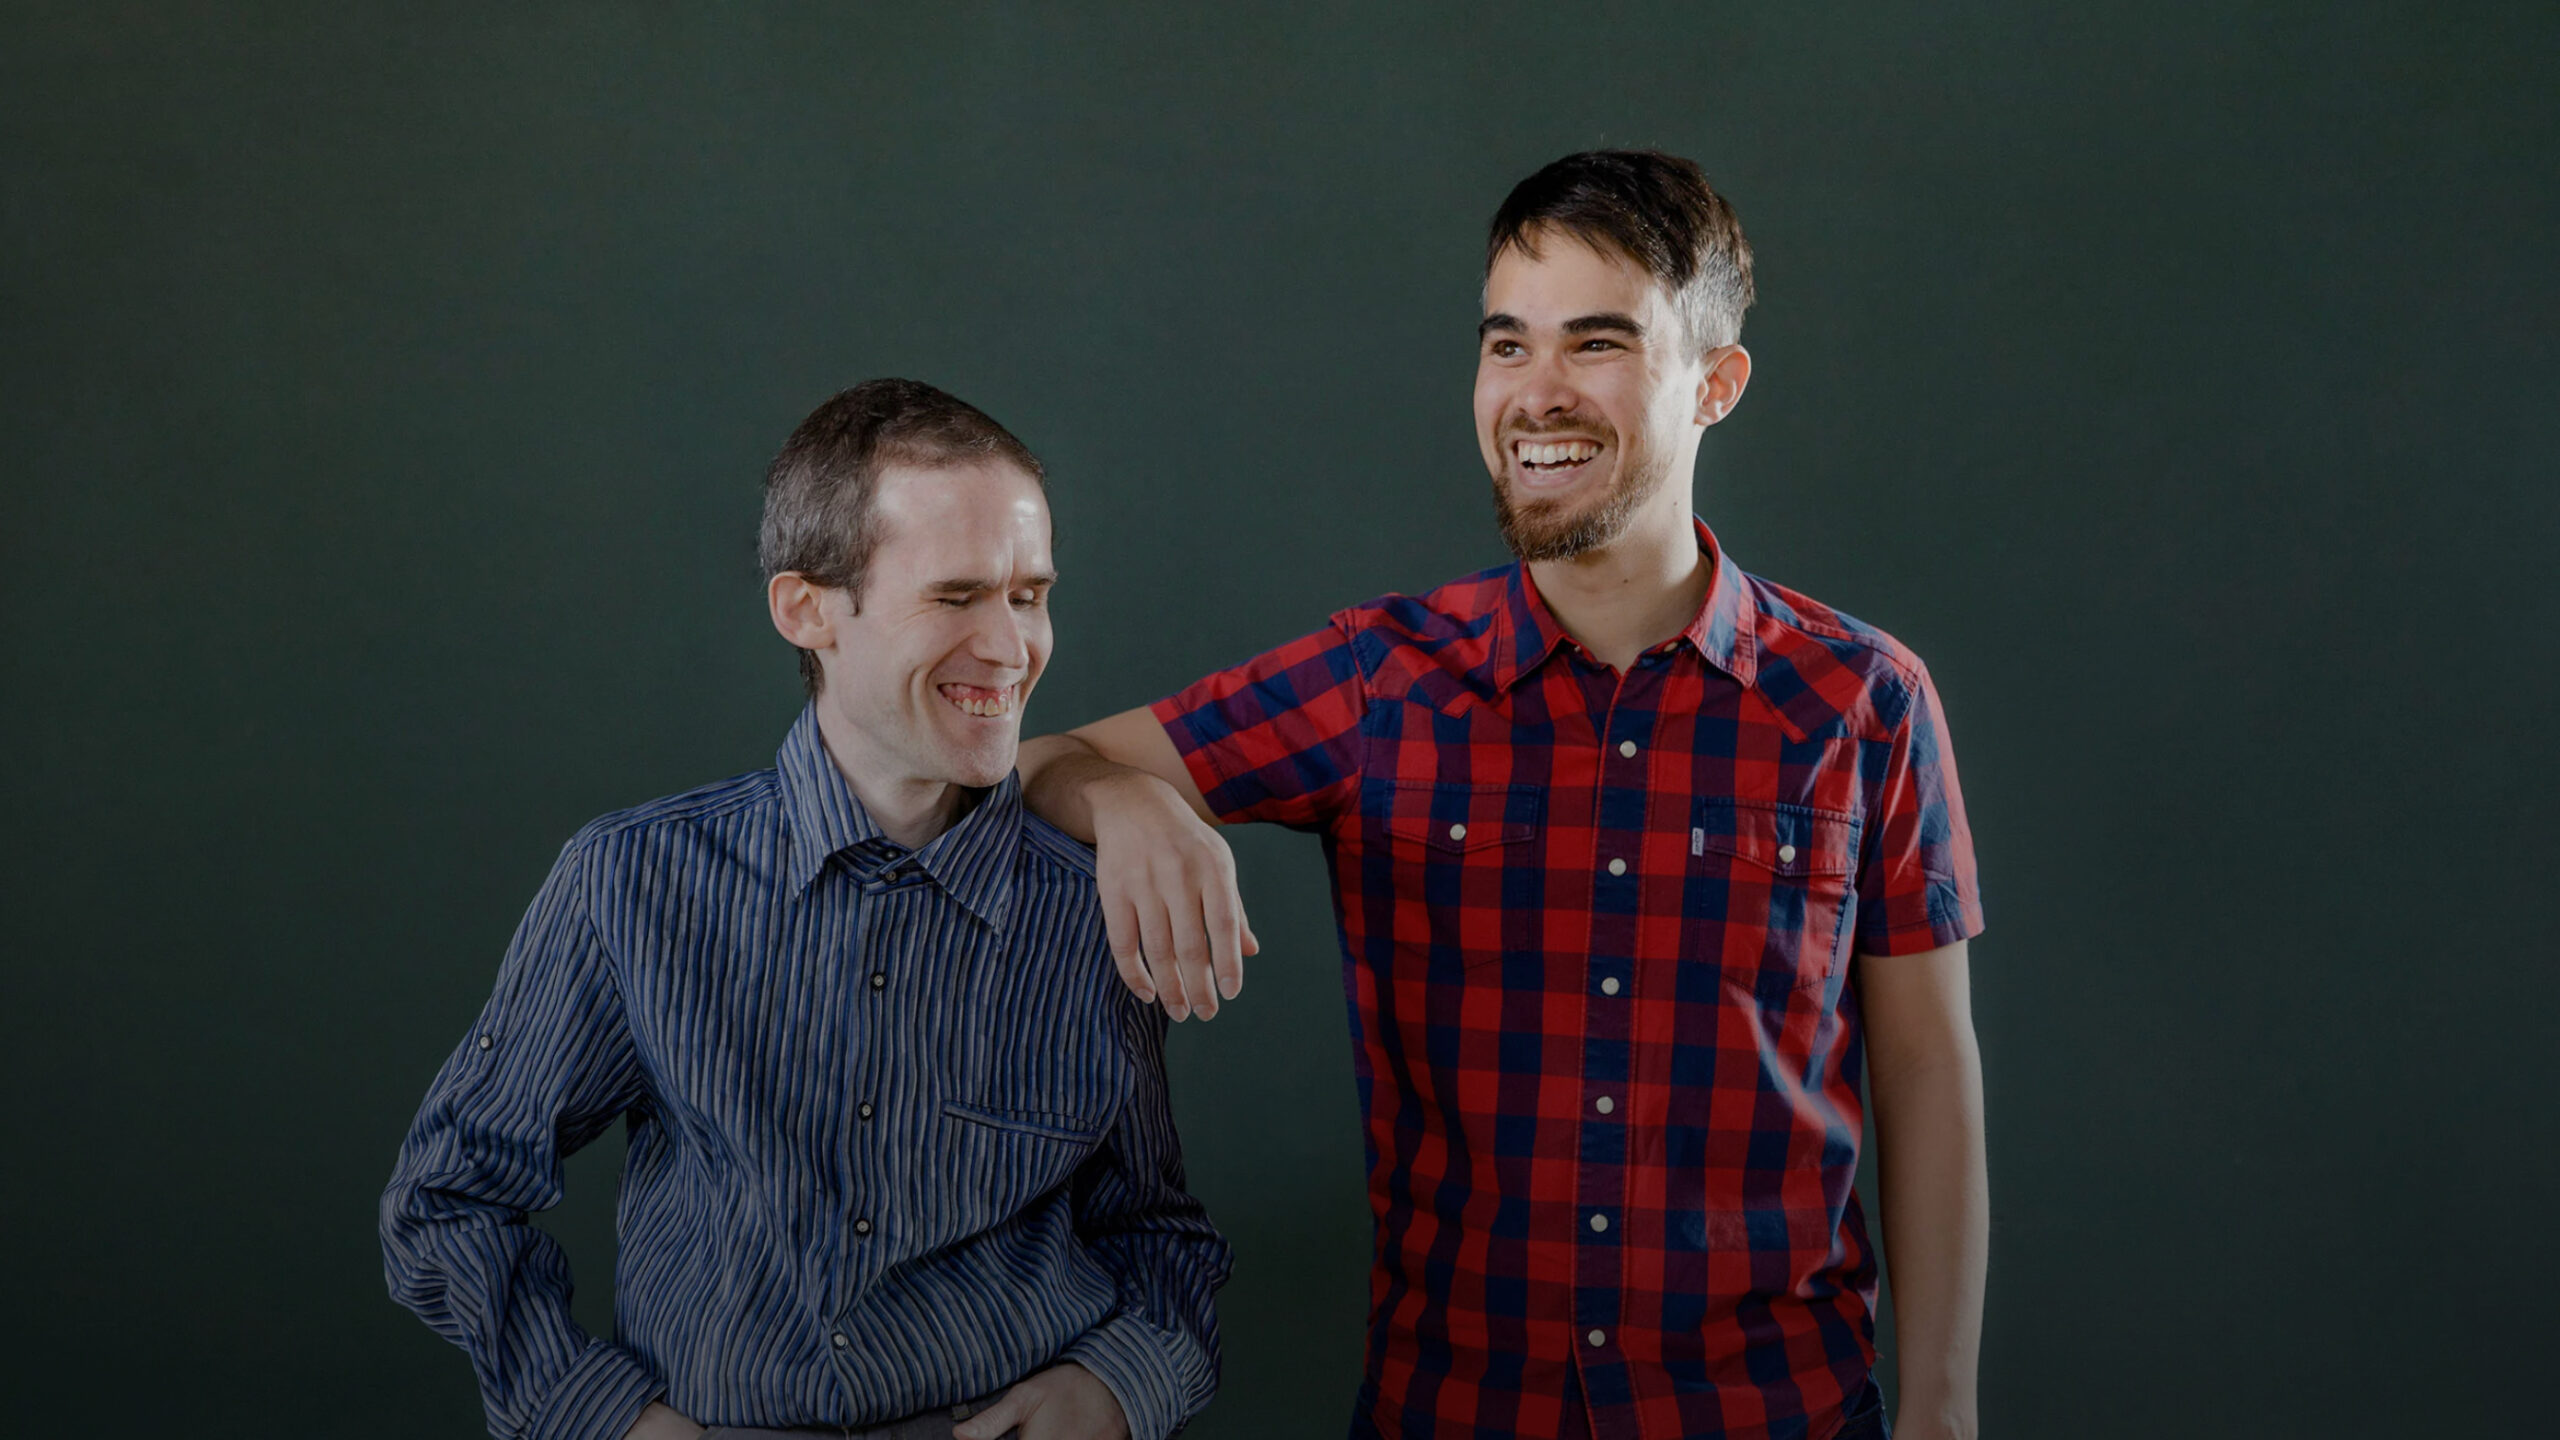 Two men smiling, one with his arm around the other, standing against a dark green background. they are wearing casual shirts.